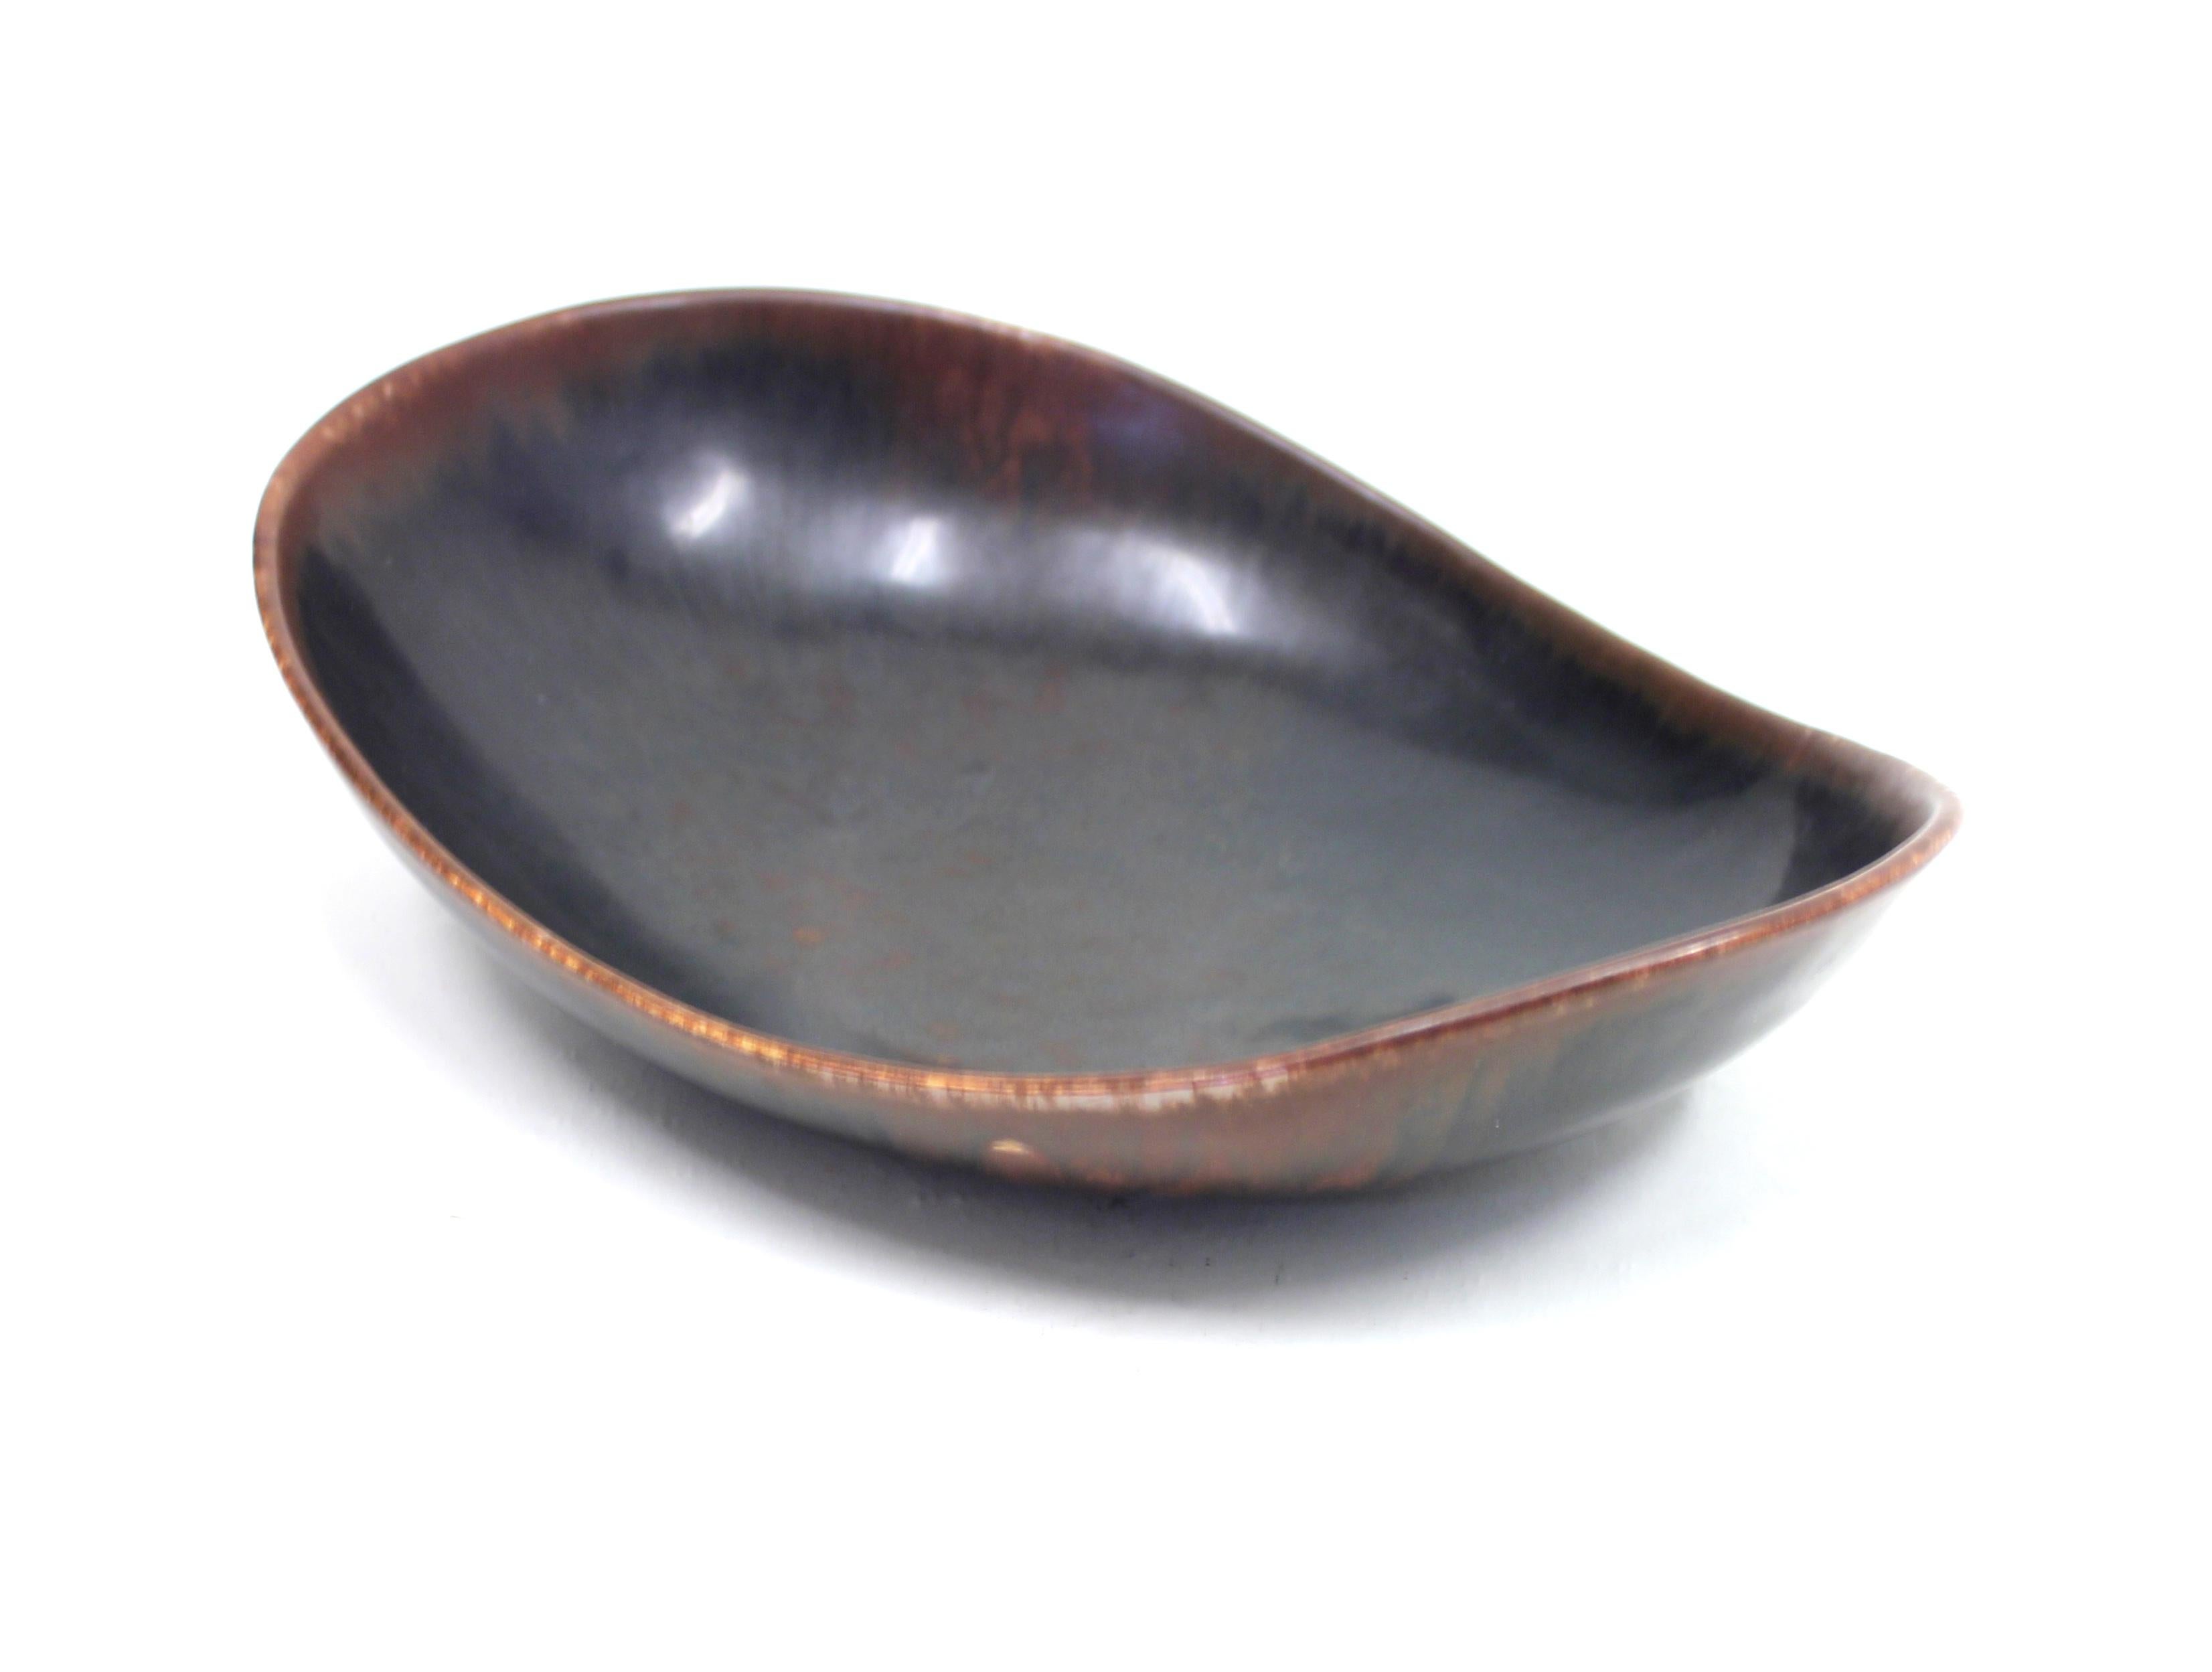 Large brown ceramic bowl designed by Carl-Harry Stålhane in the 1950s, very good vintage condition.